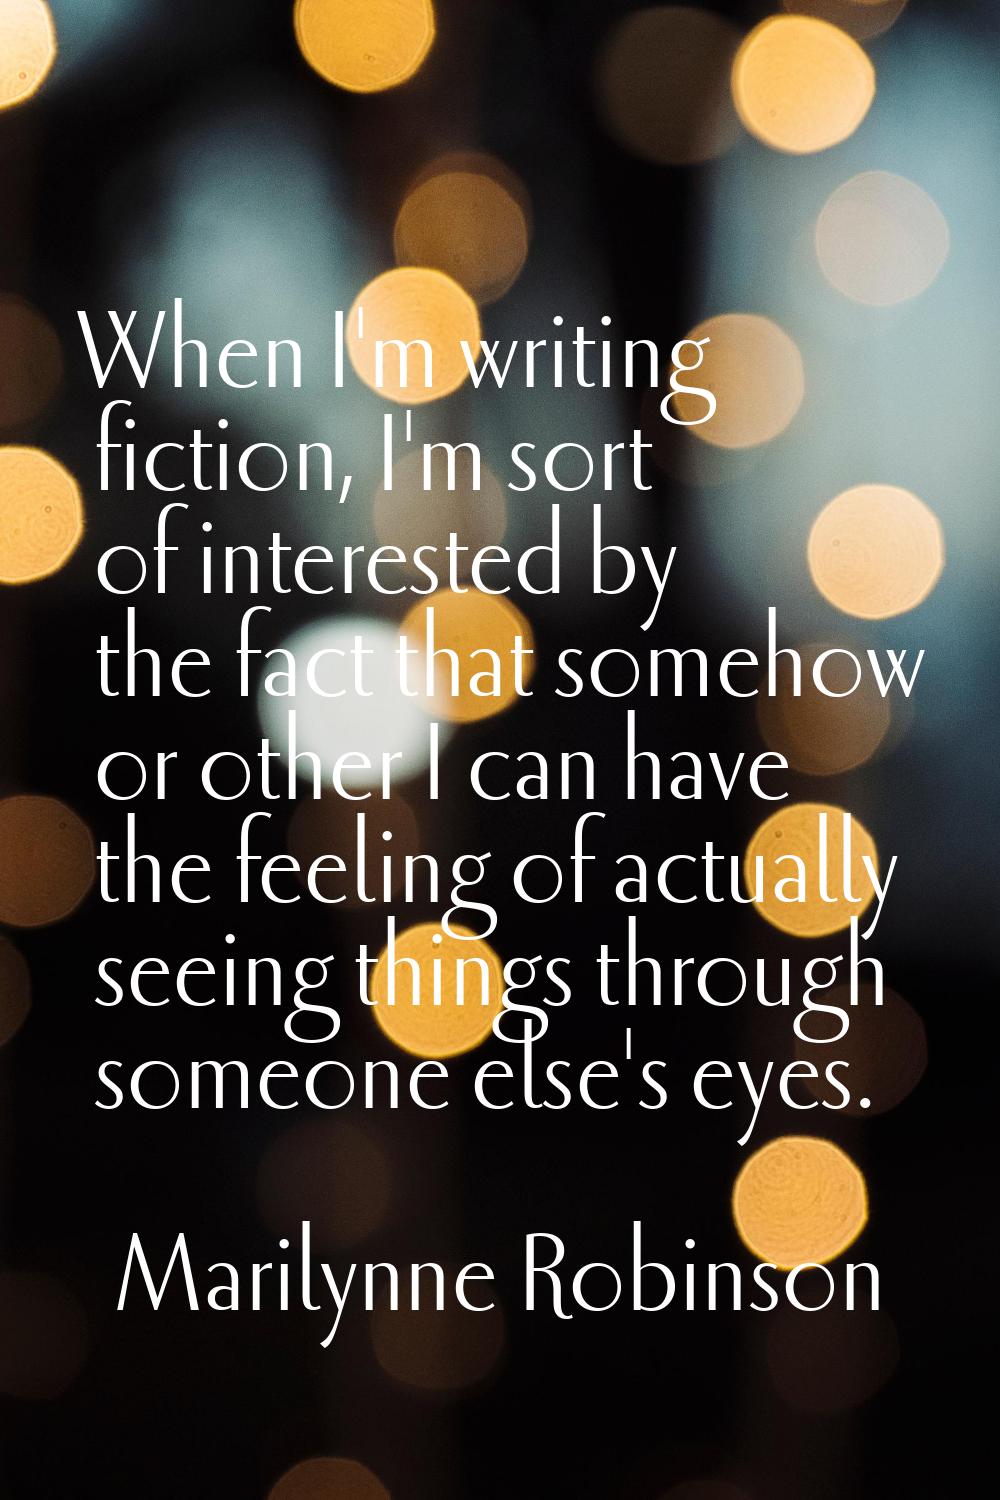 When I'm writing fiction, I'm sort of interested by the fact that somehow or other I can have the f